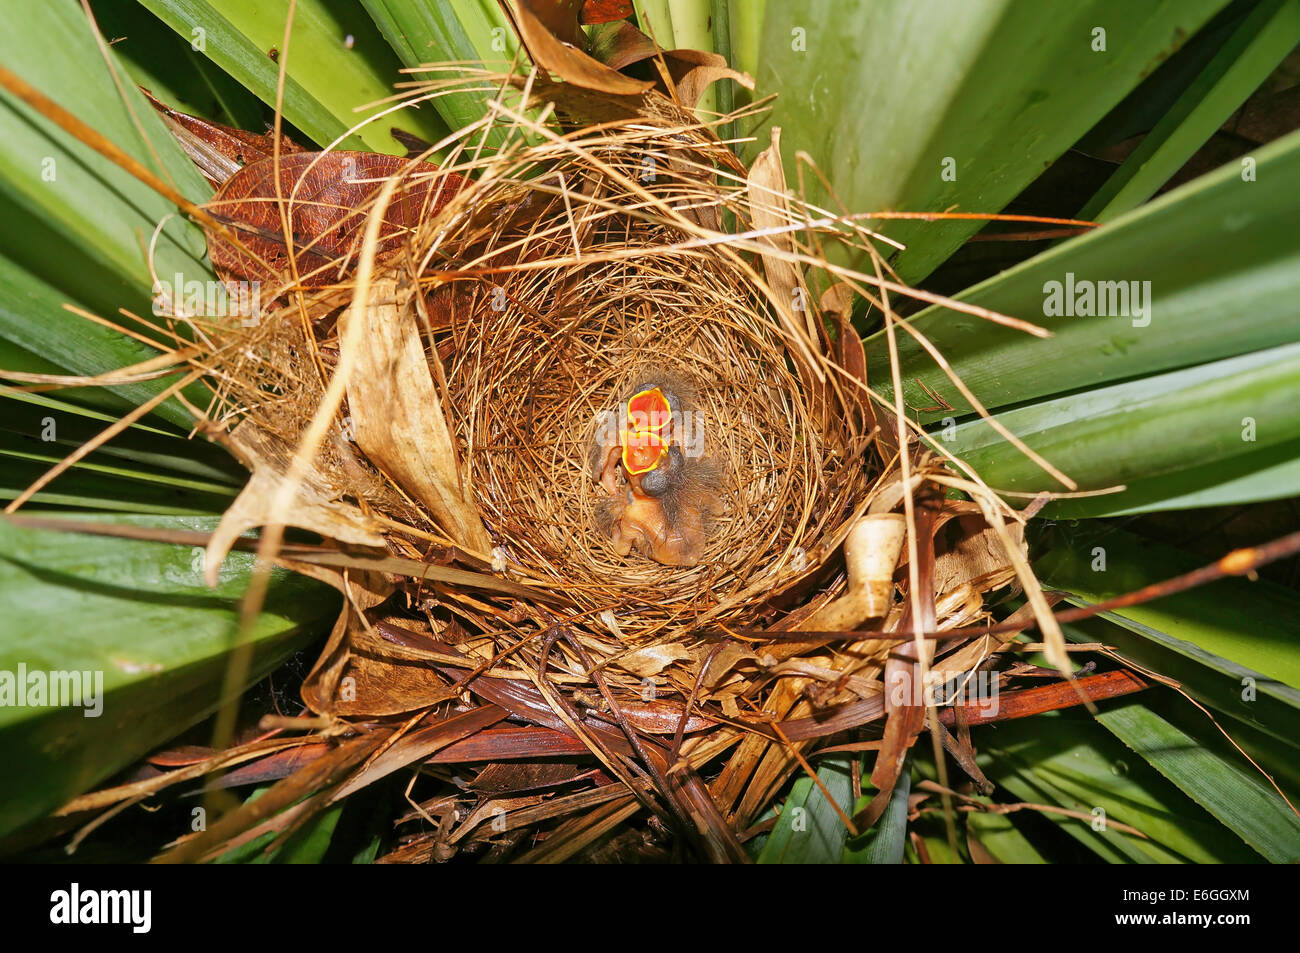 bird nest in a pandanus with two hungry babies of Lesser Kiskadee flycatcher Stock Photo